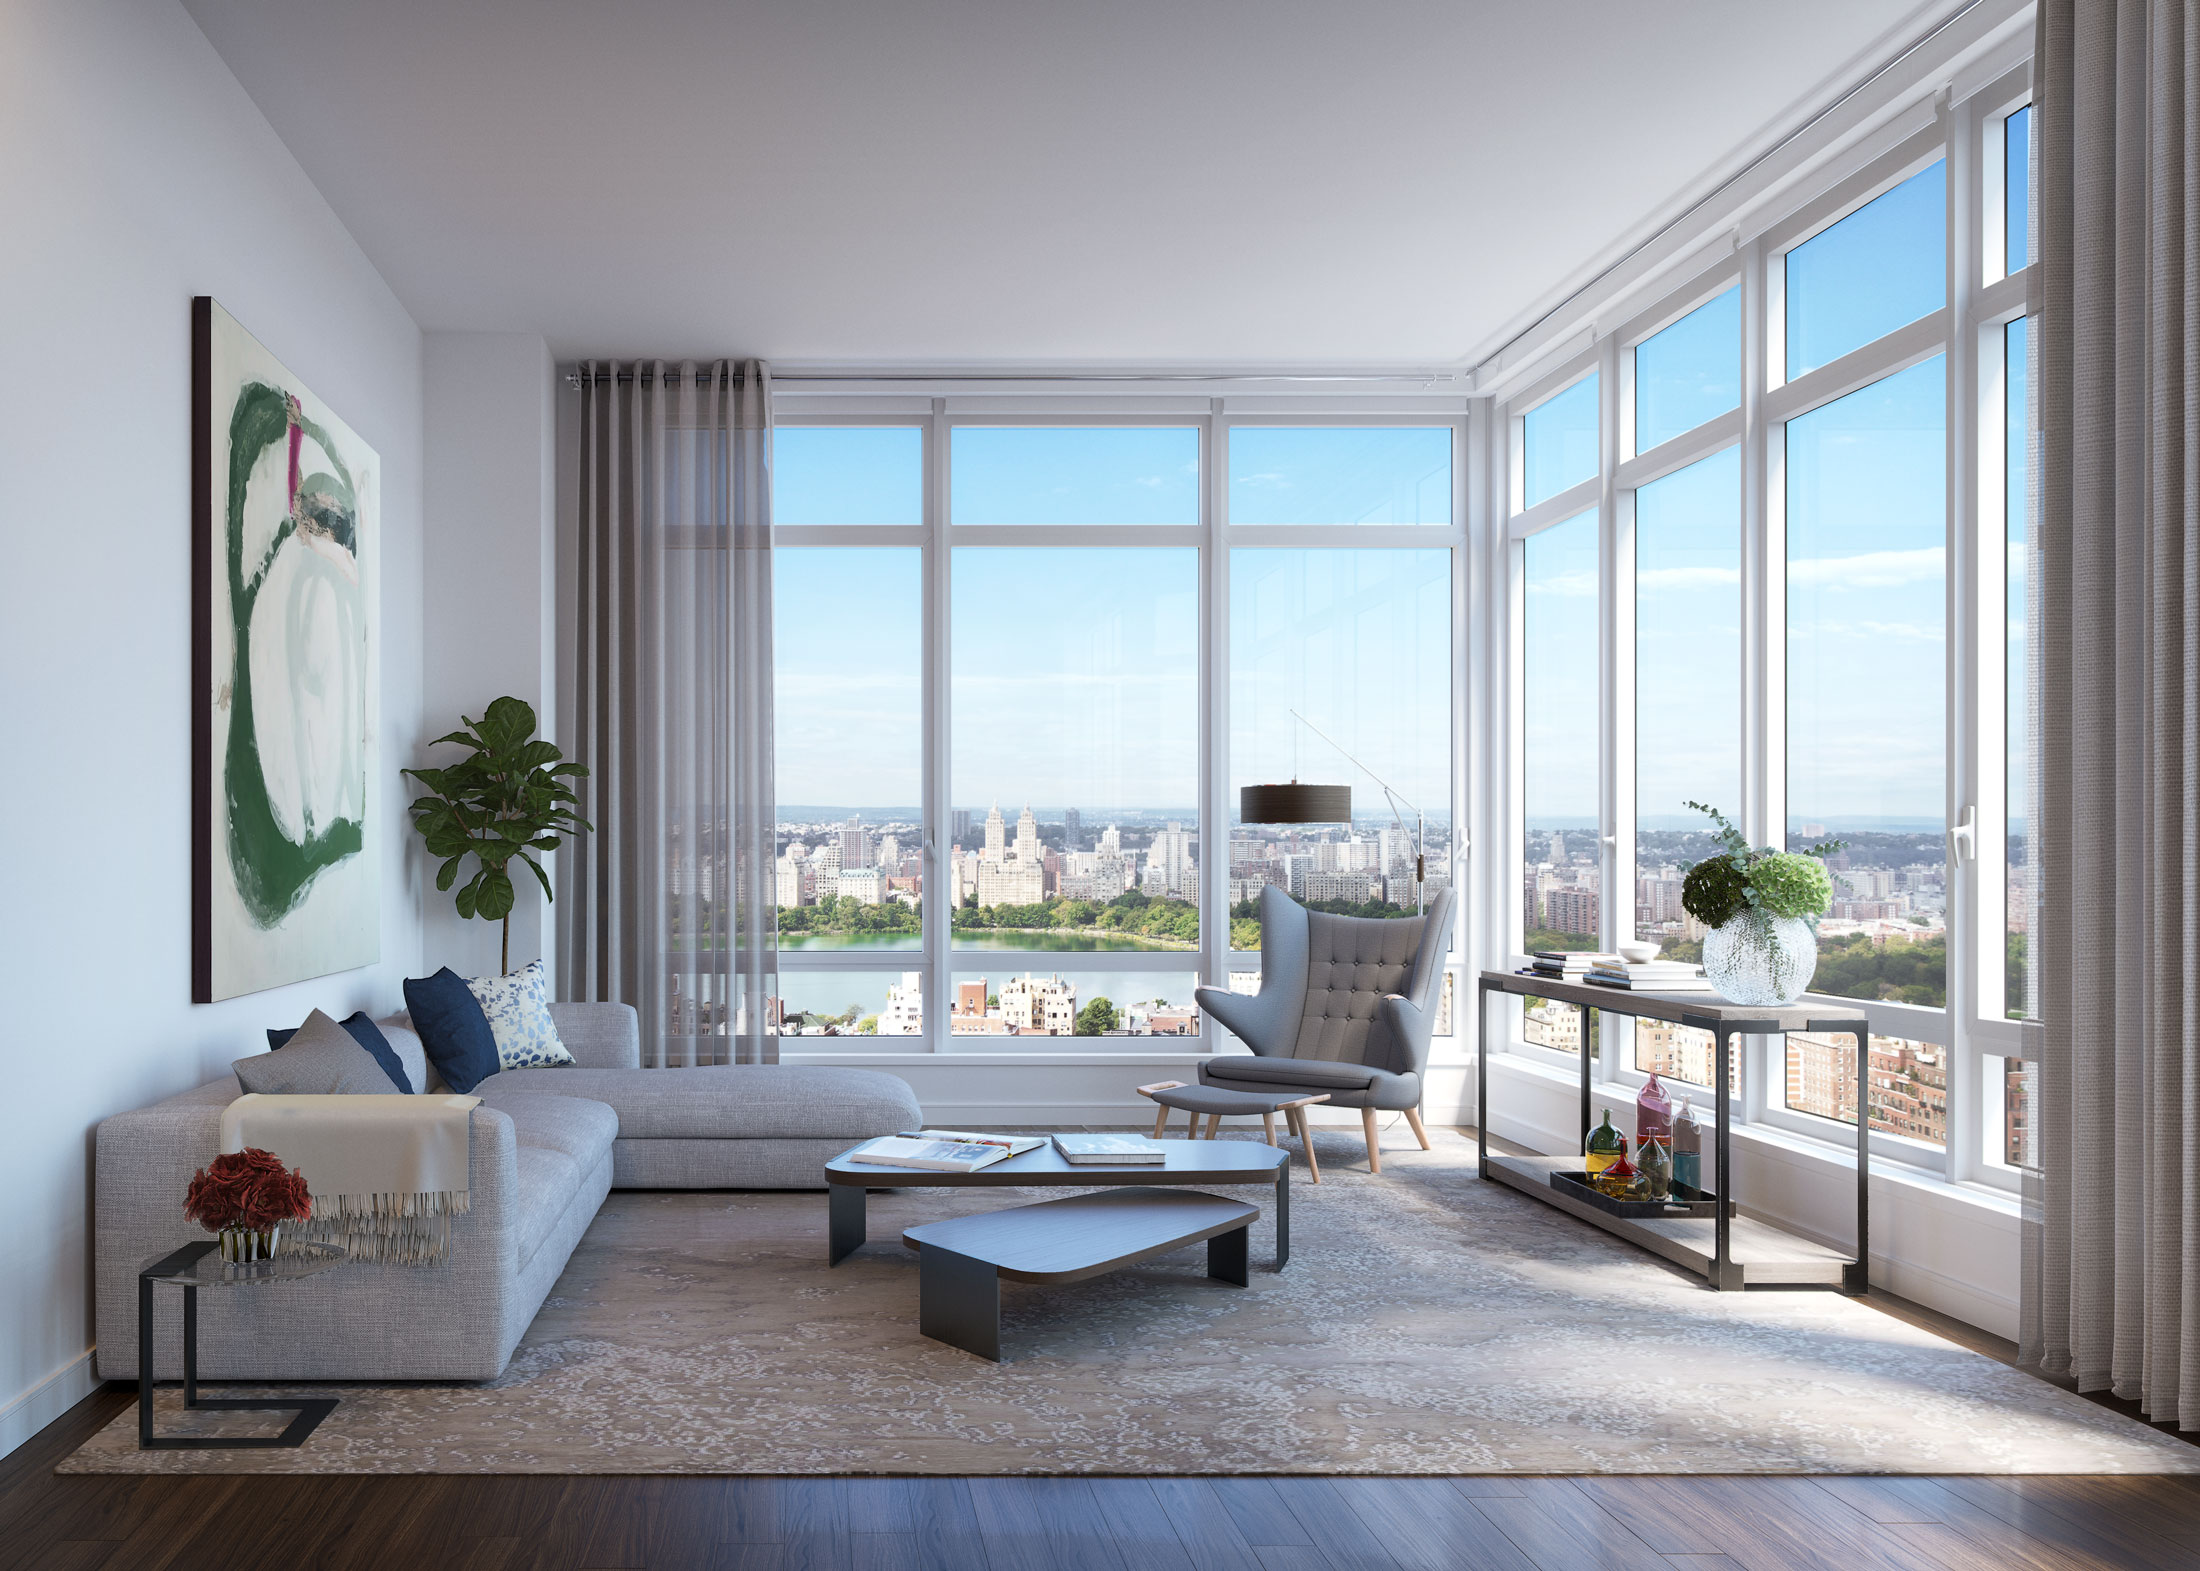 Architectural Rendering of the living room of The Easton project located on the Upper East Side, New York City